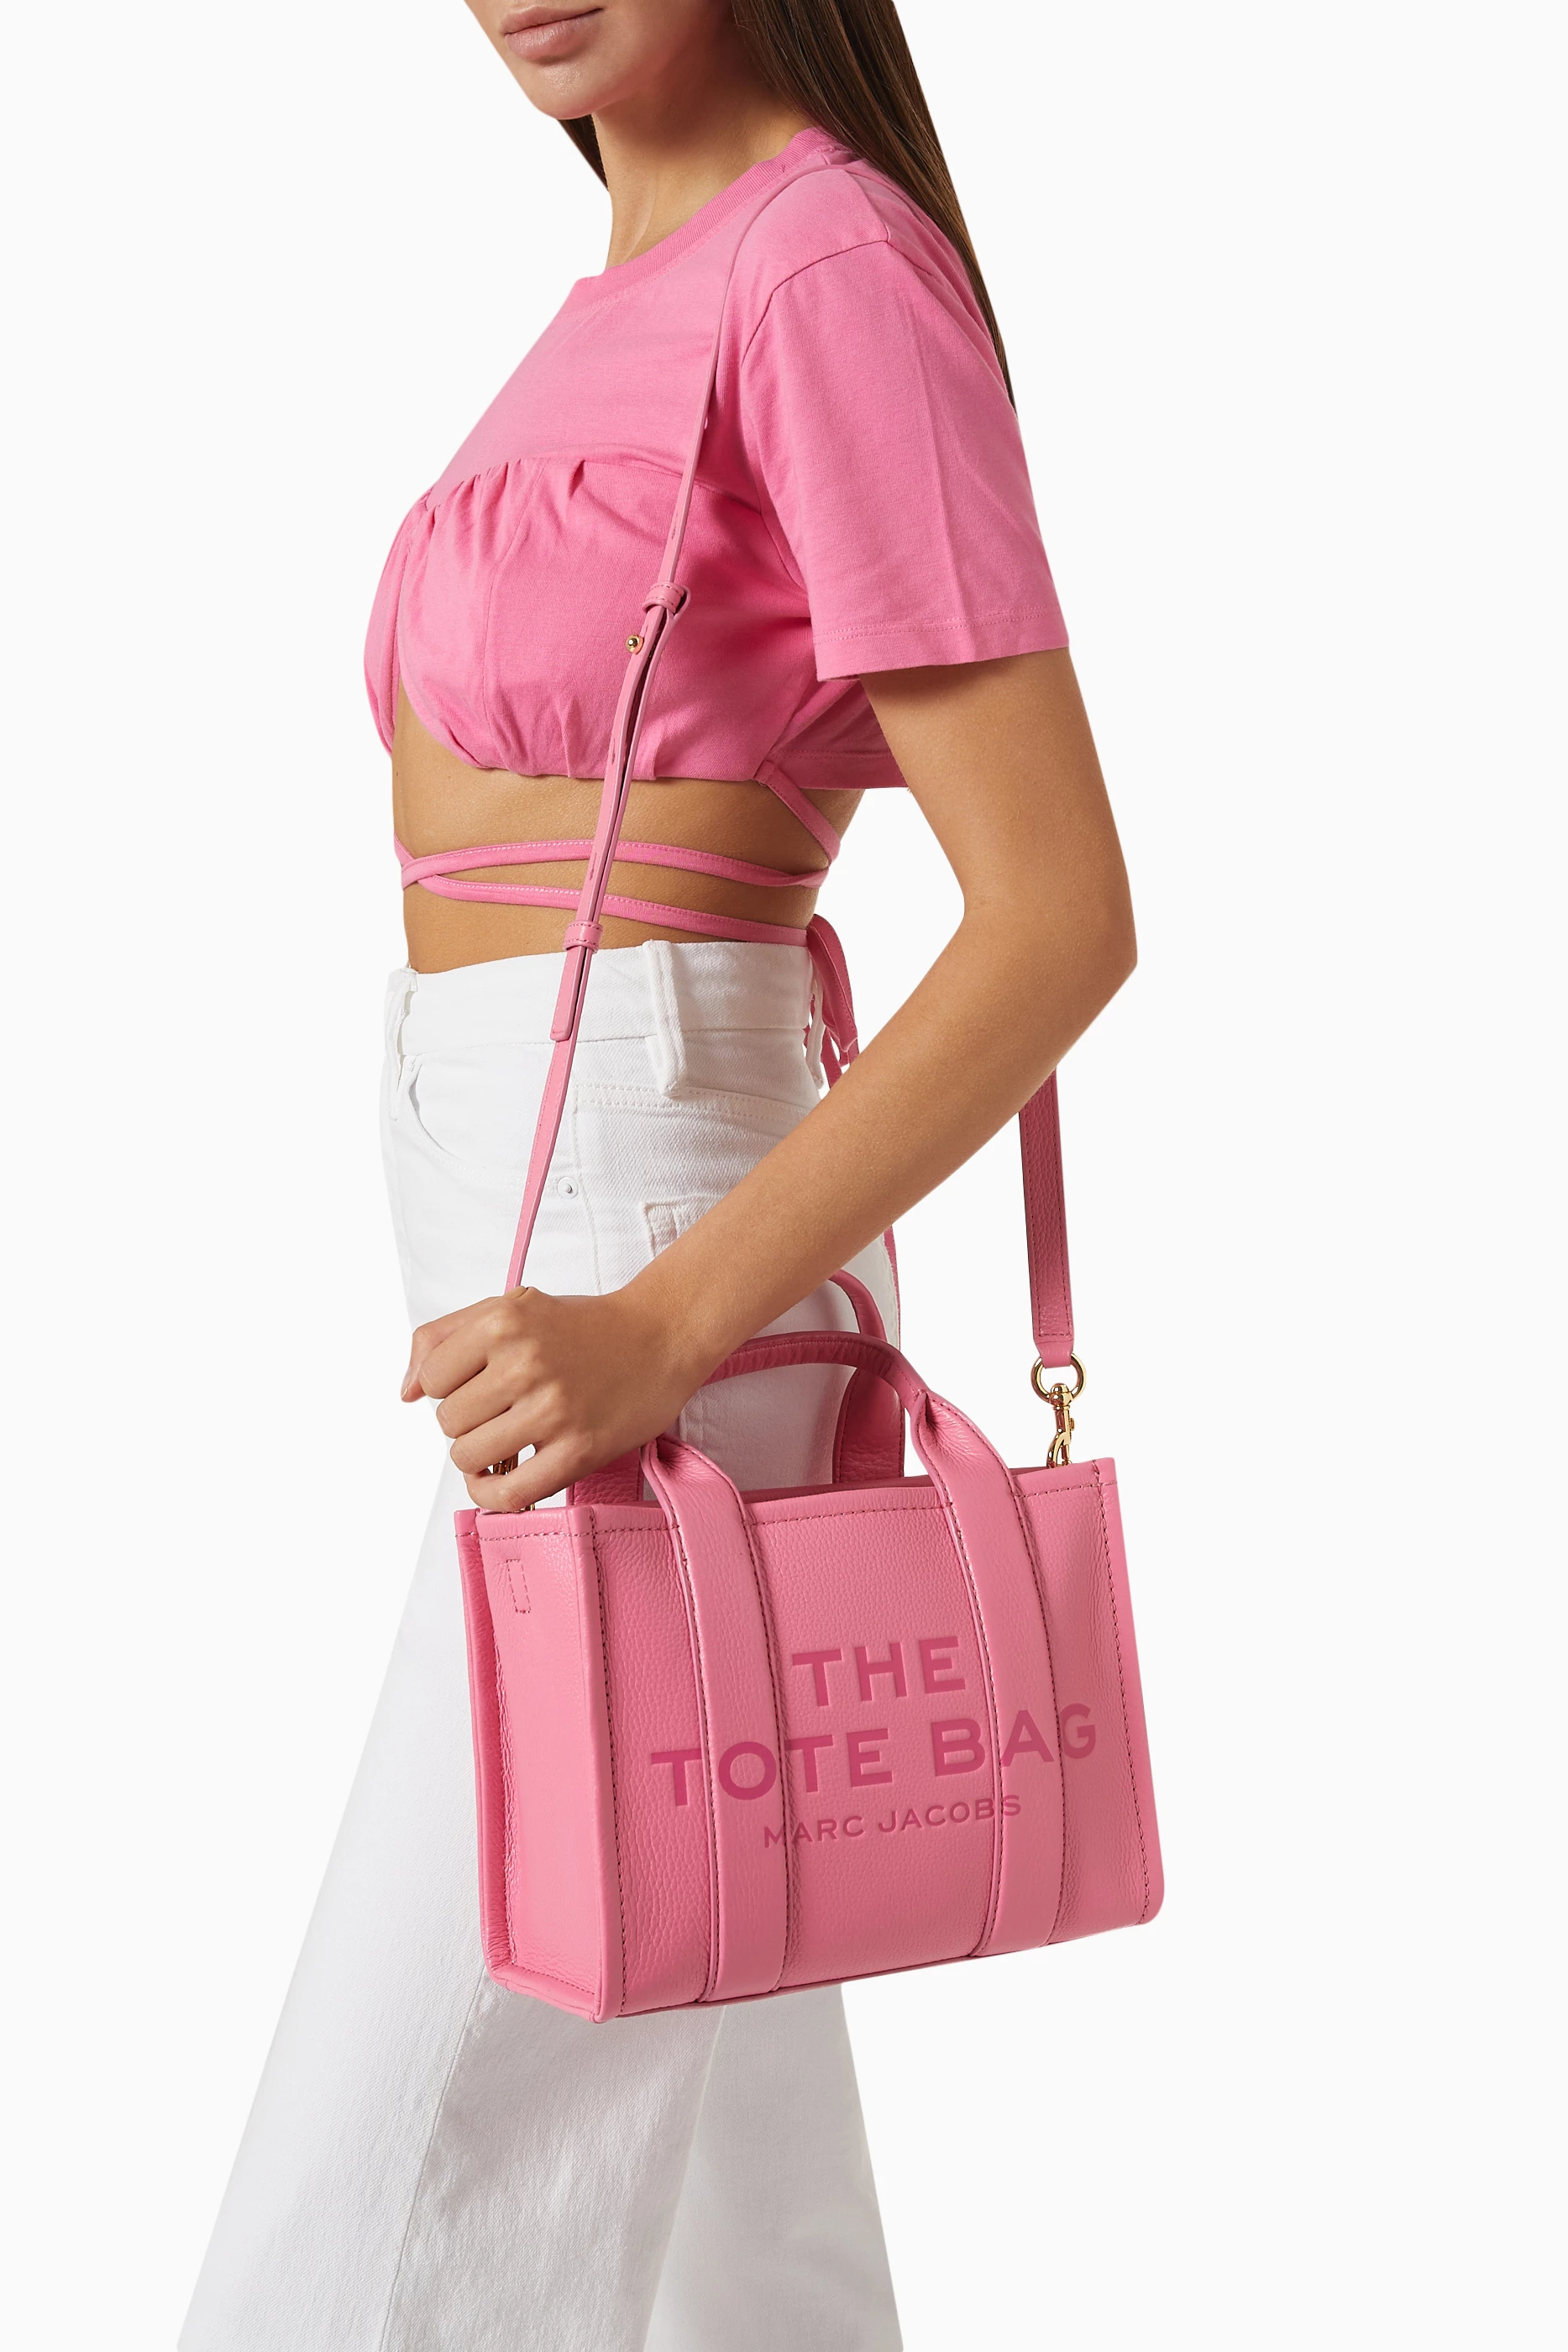 morning glory marc jacobs tote bag pink